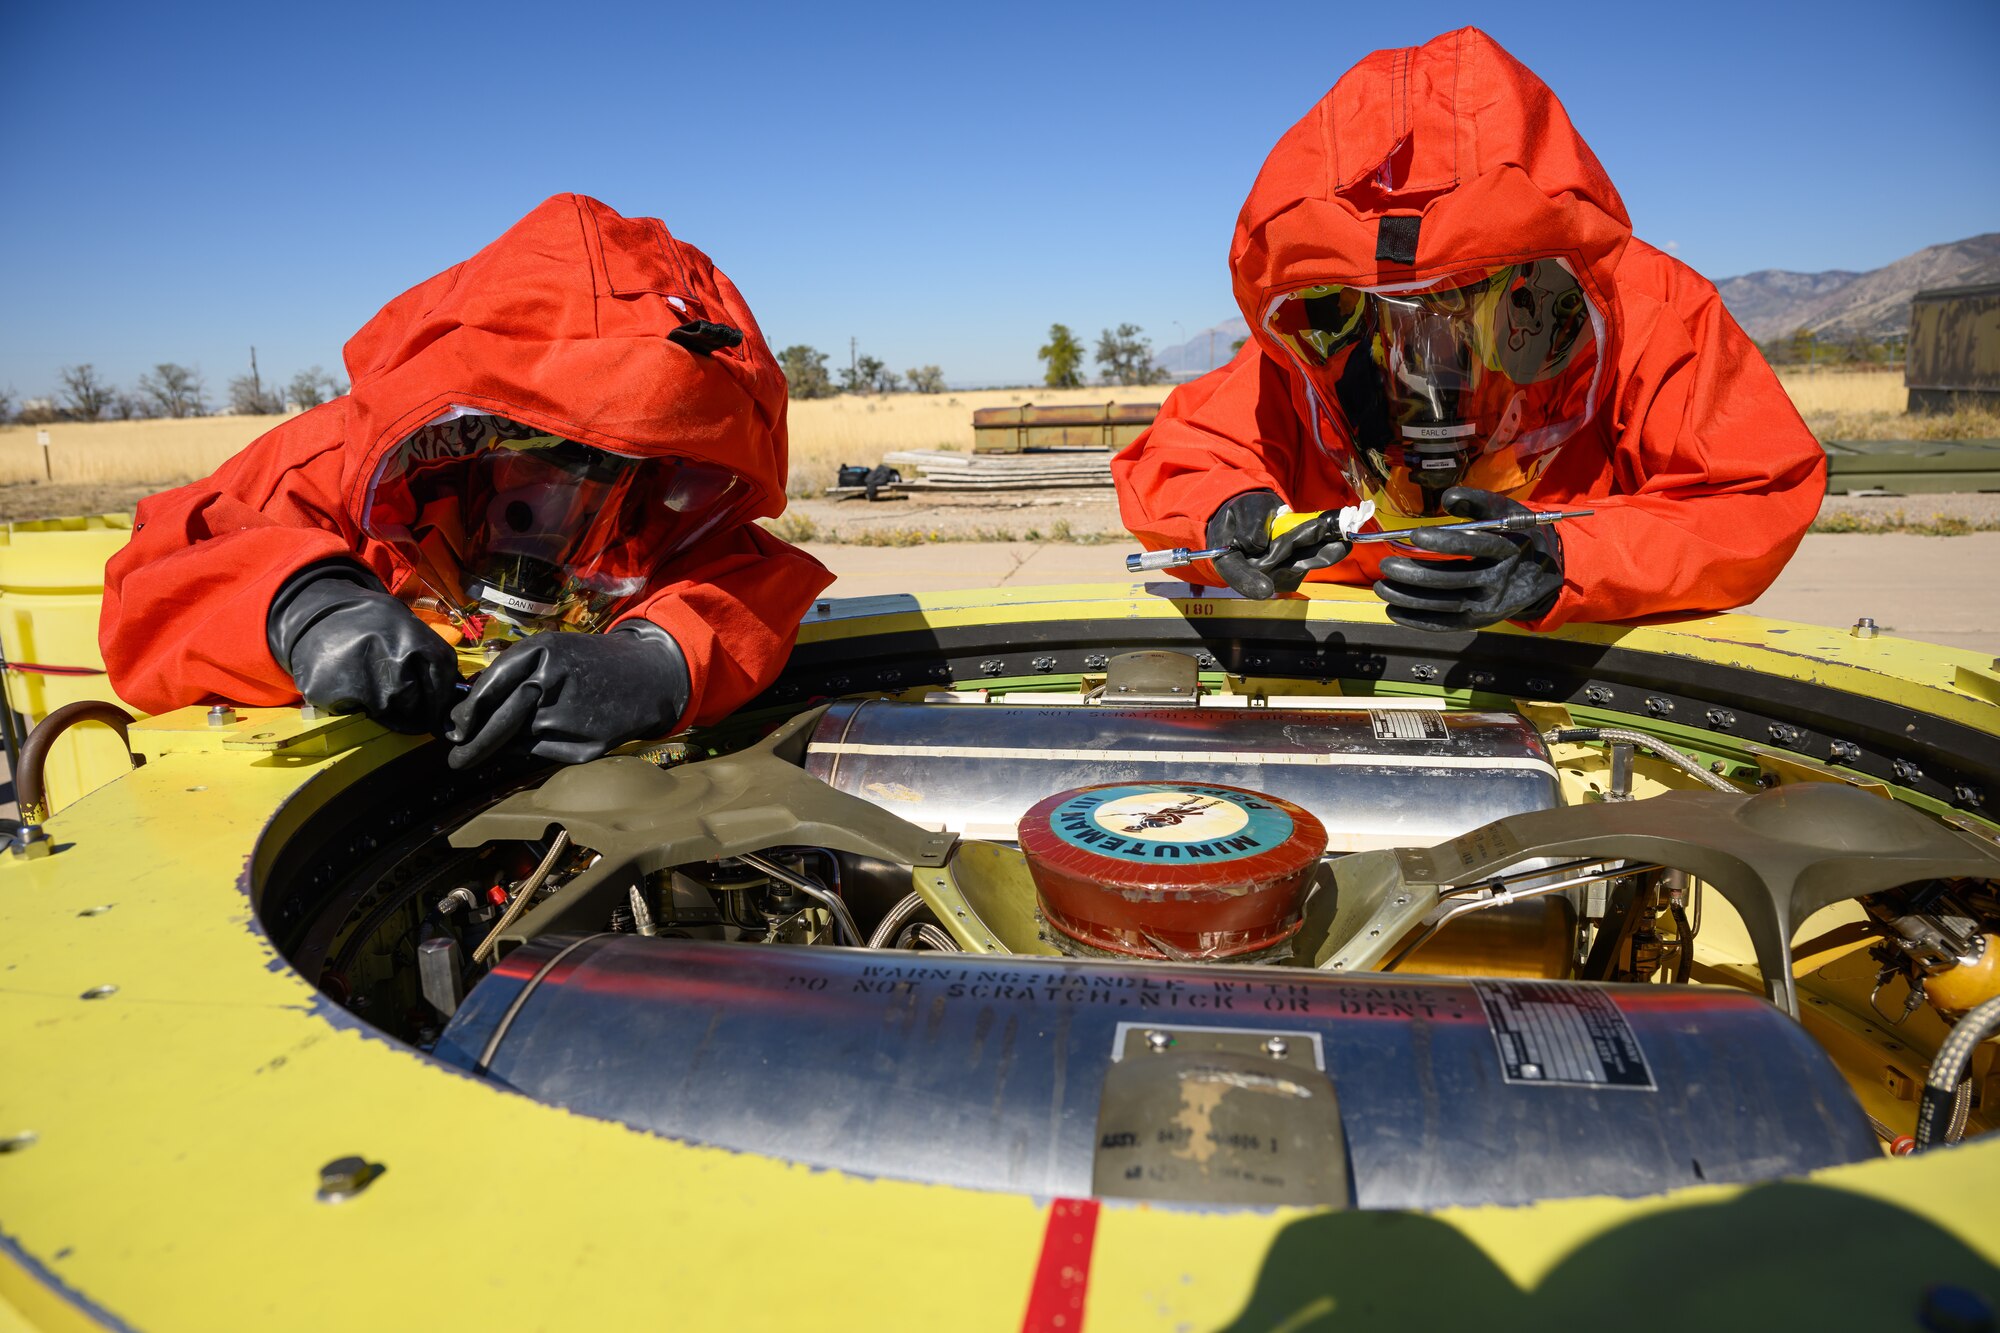 Members of the Missile Mishap Response Team work on a Minuteman III inert guidance system during a training event at Hill Air Force Base, Utah, Oct. 4, 2022.